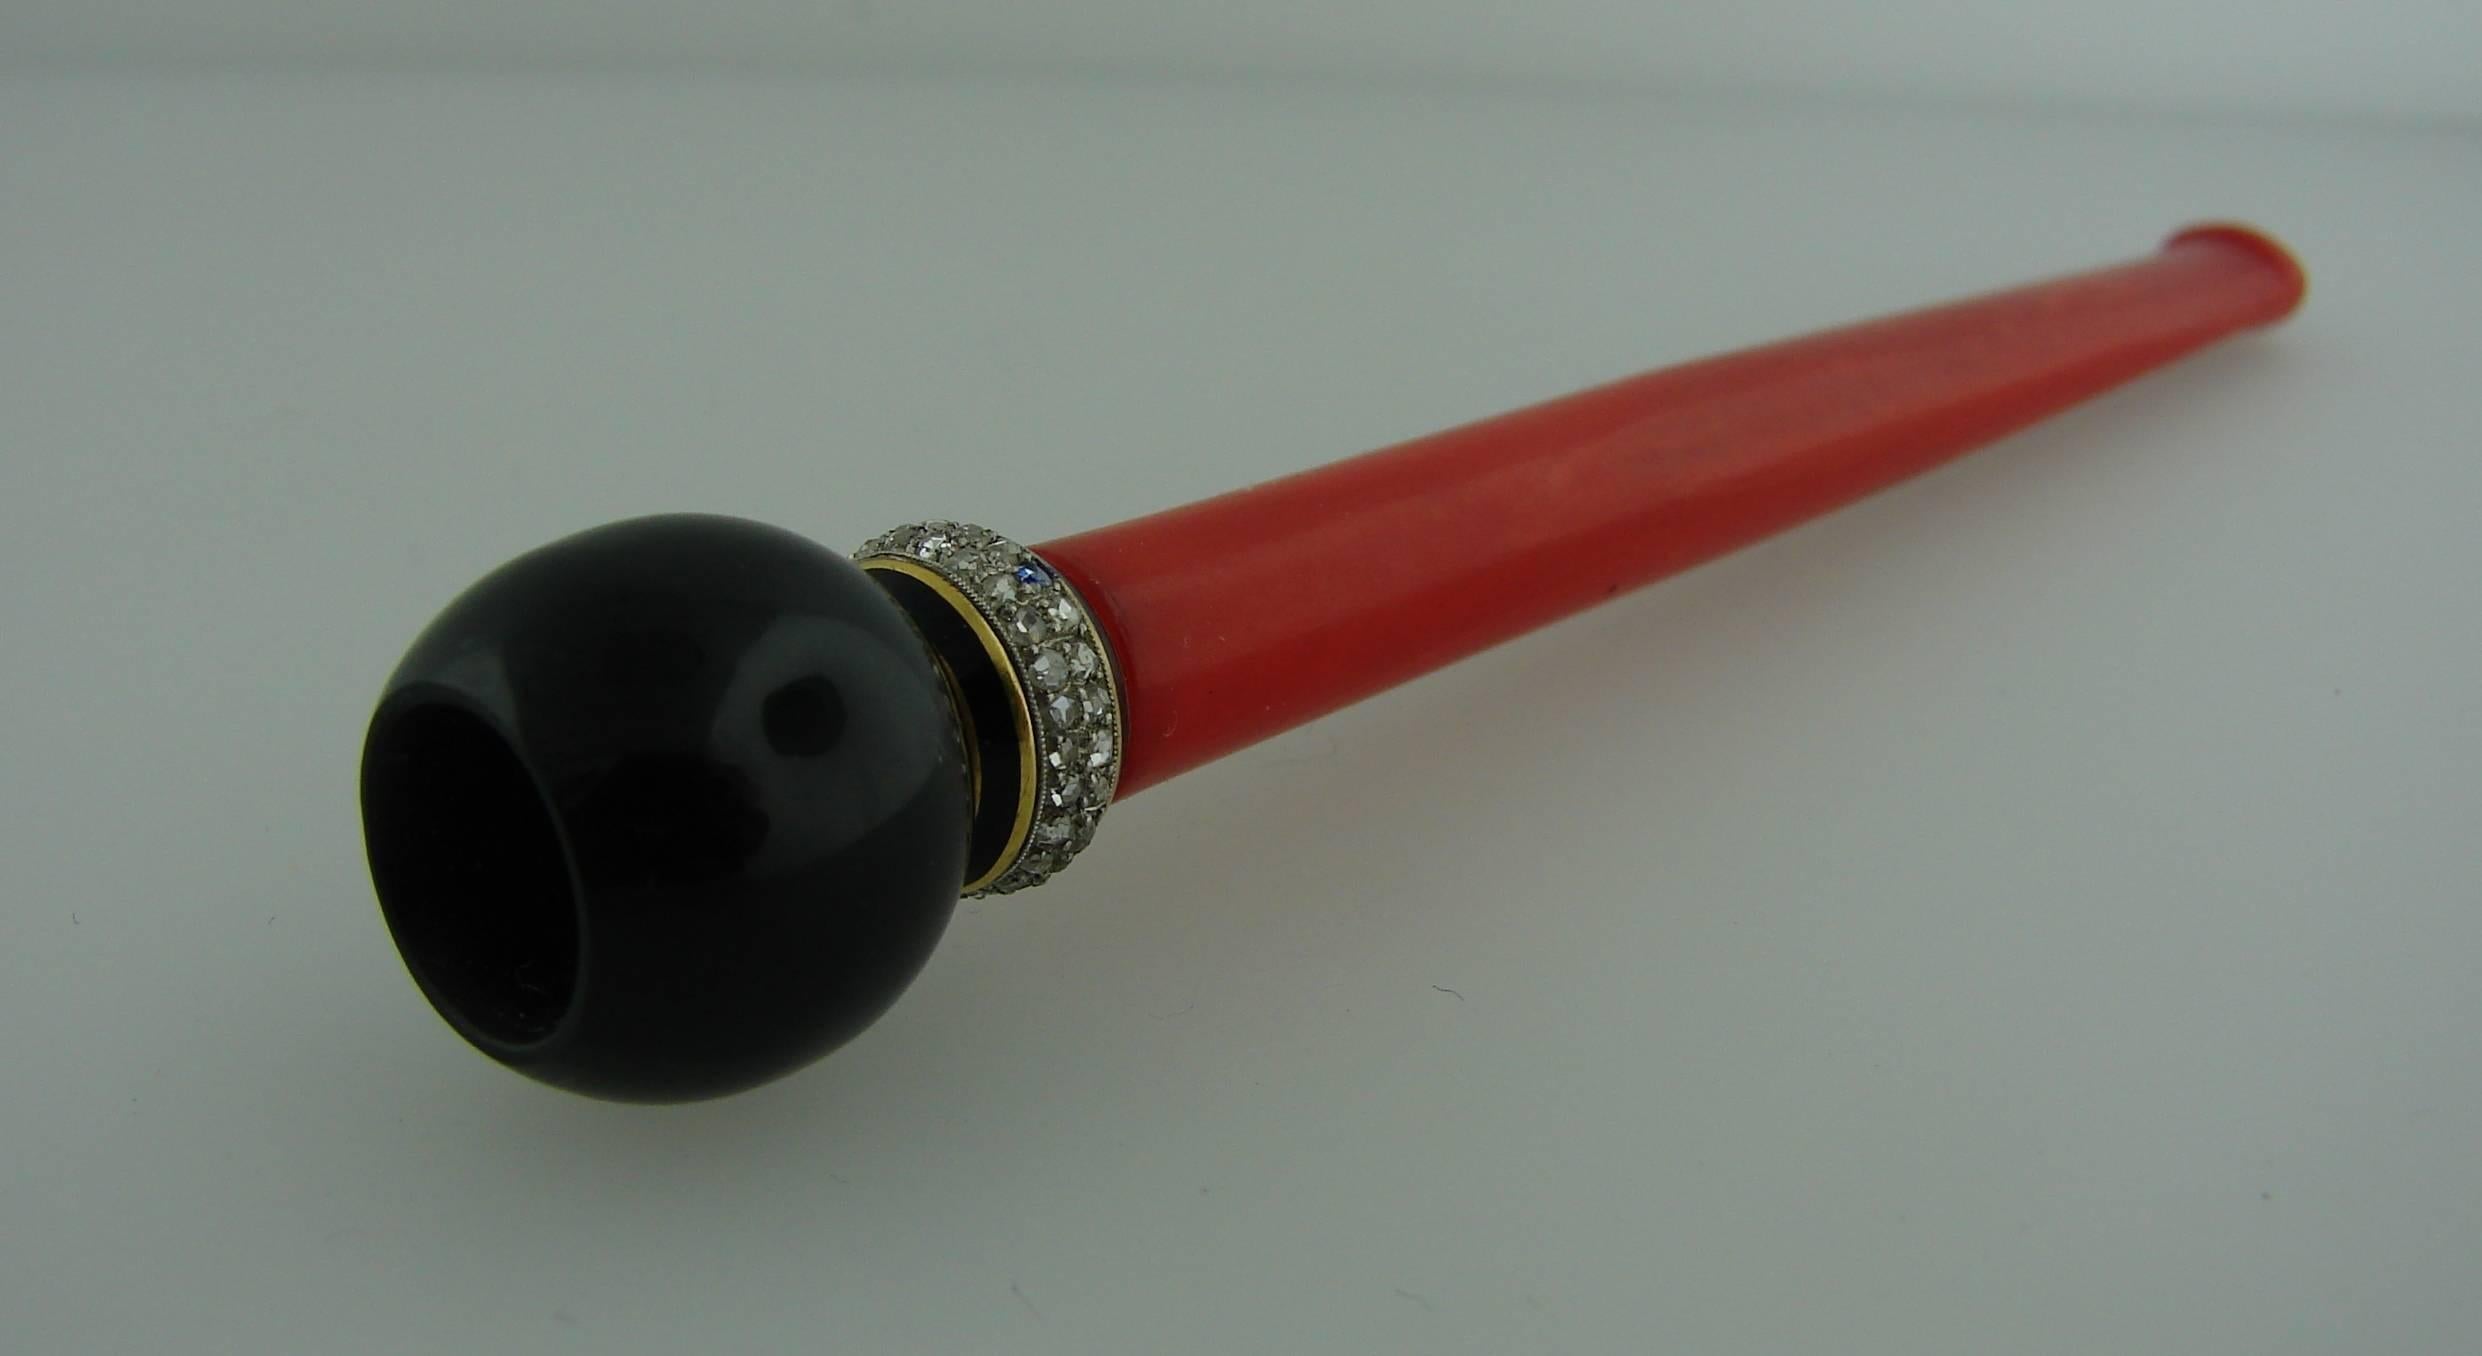 Chic cigarette holder created during Art Deco era when for the first time women were allowed smoking cigarettes in public. 
it is made of black onyx, red Bakelite, yellow gold, platinum and accented with black enamel. 
The cigarette holder is 4-1/8